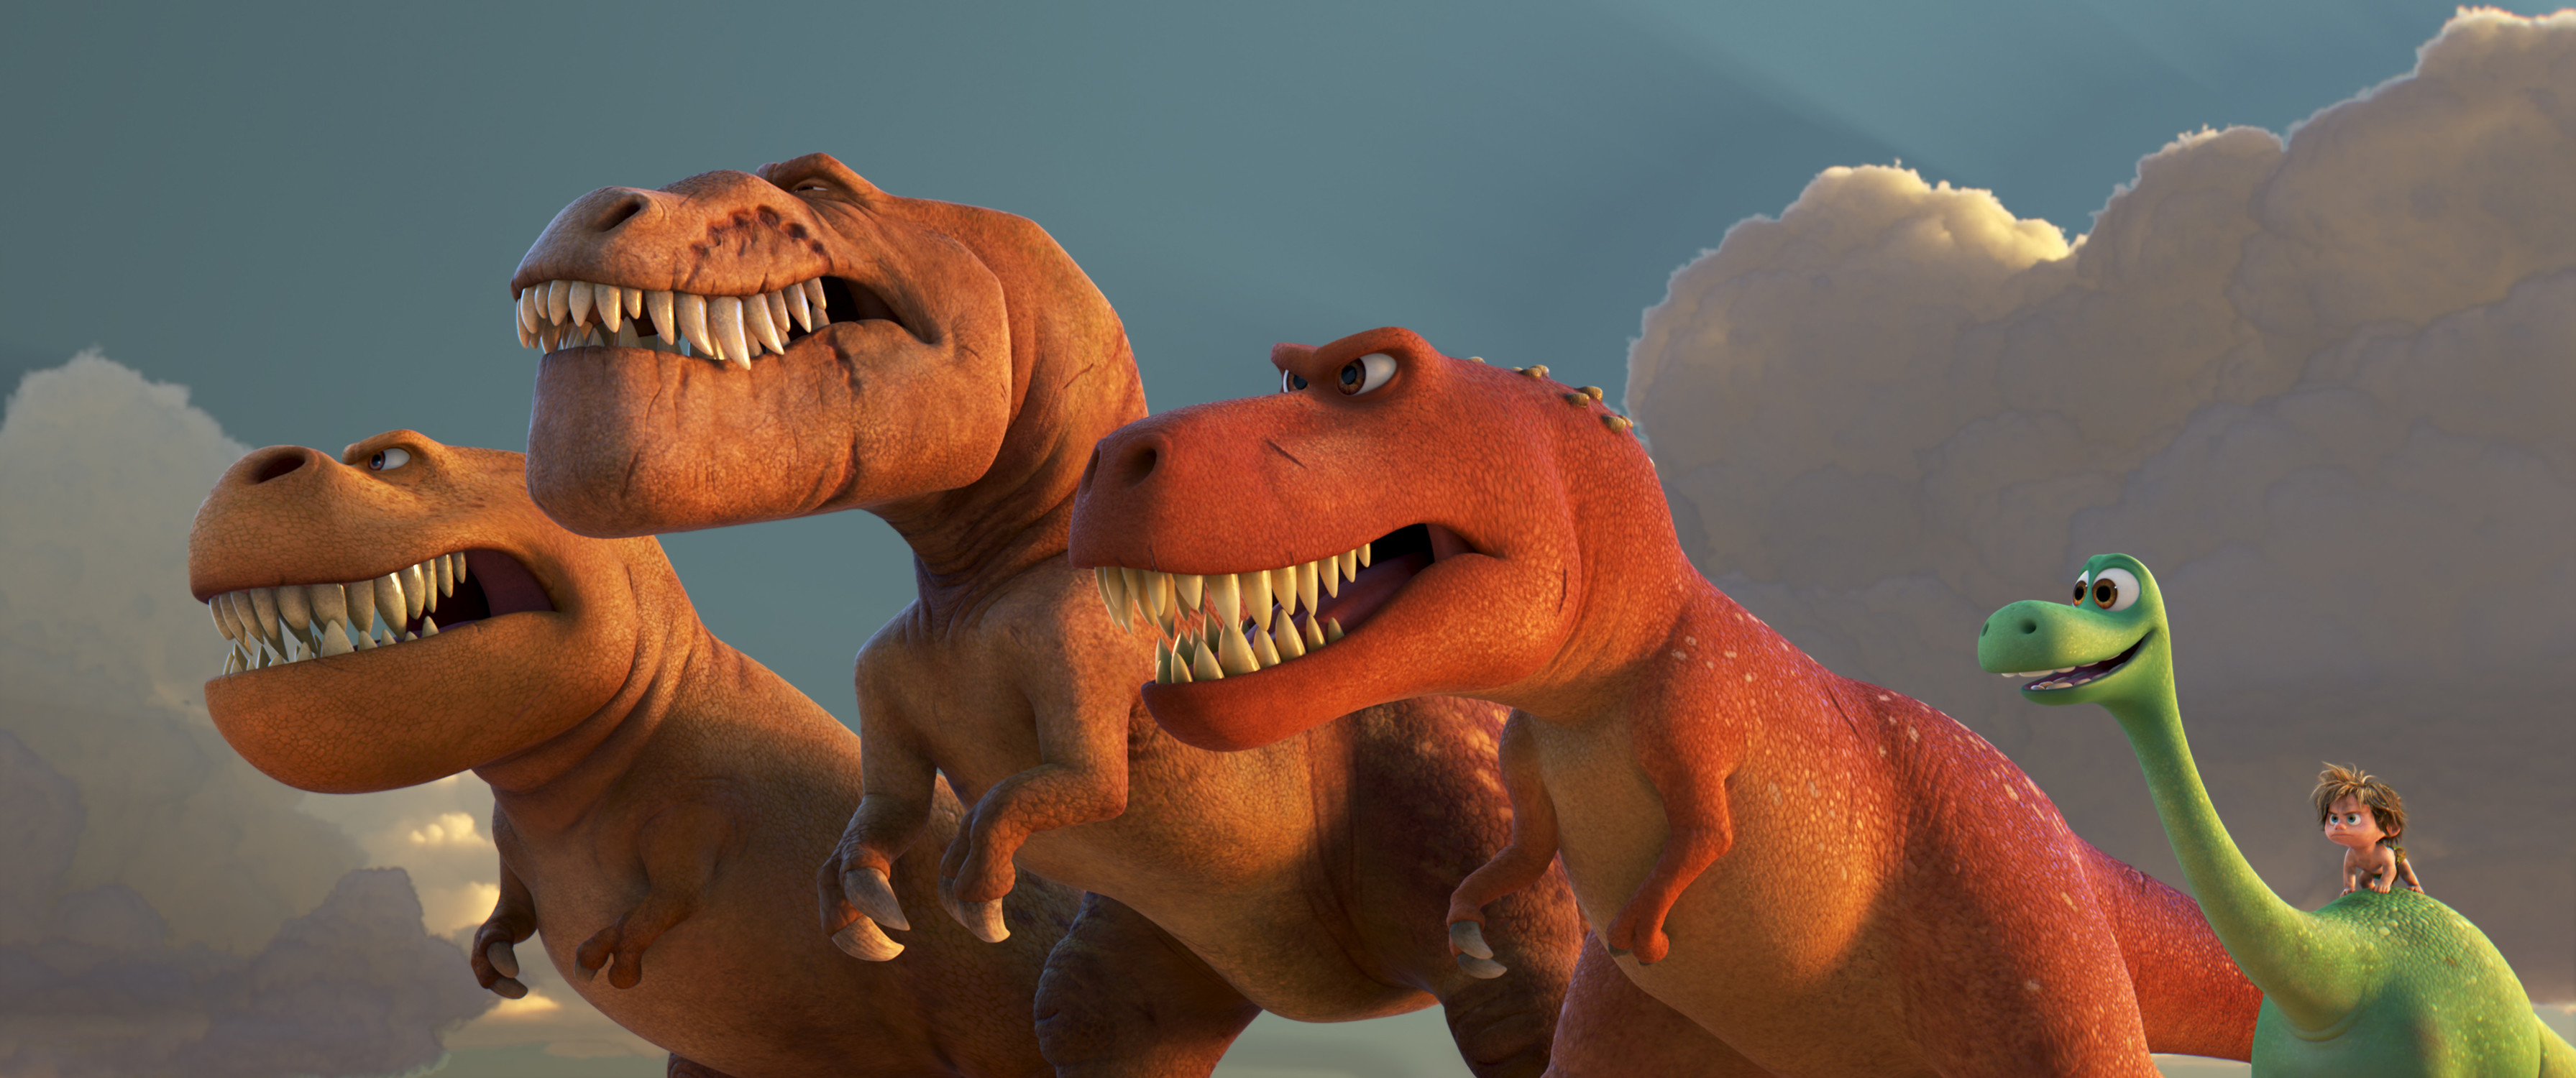 3583x1500 The Good Dinosaur HD Wallpaper | Background Image |  | ID:666790 -  Wallpaper Abyss